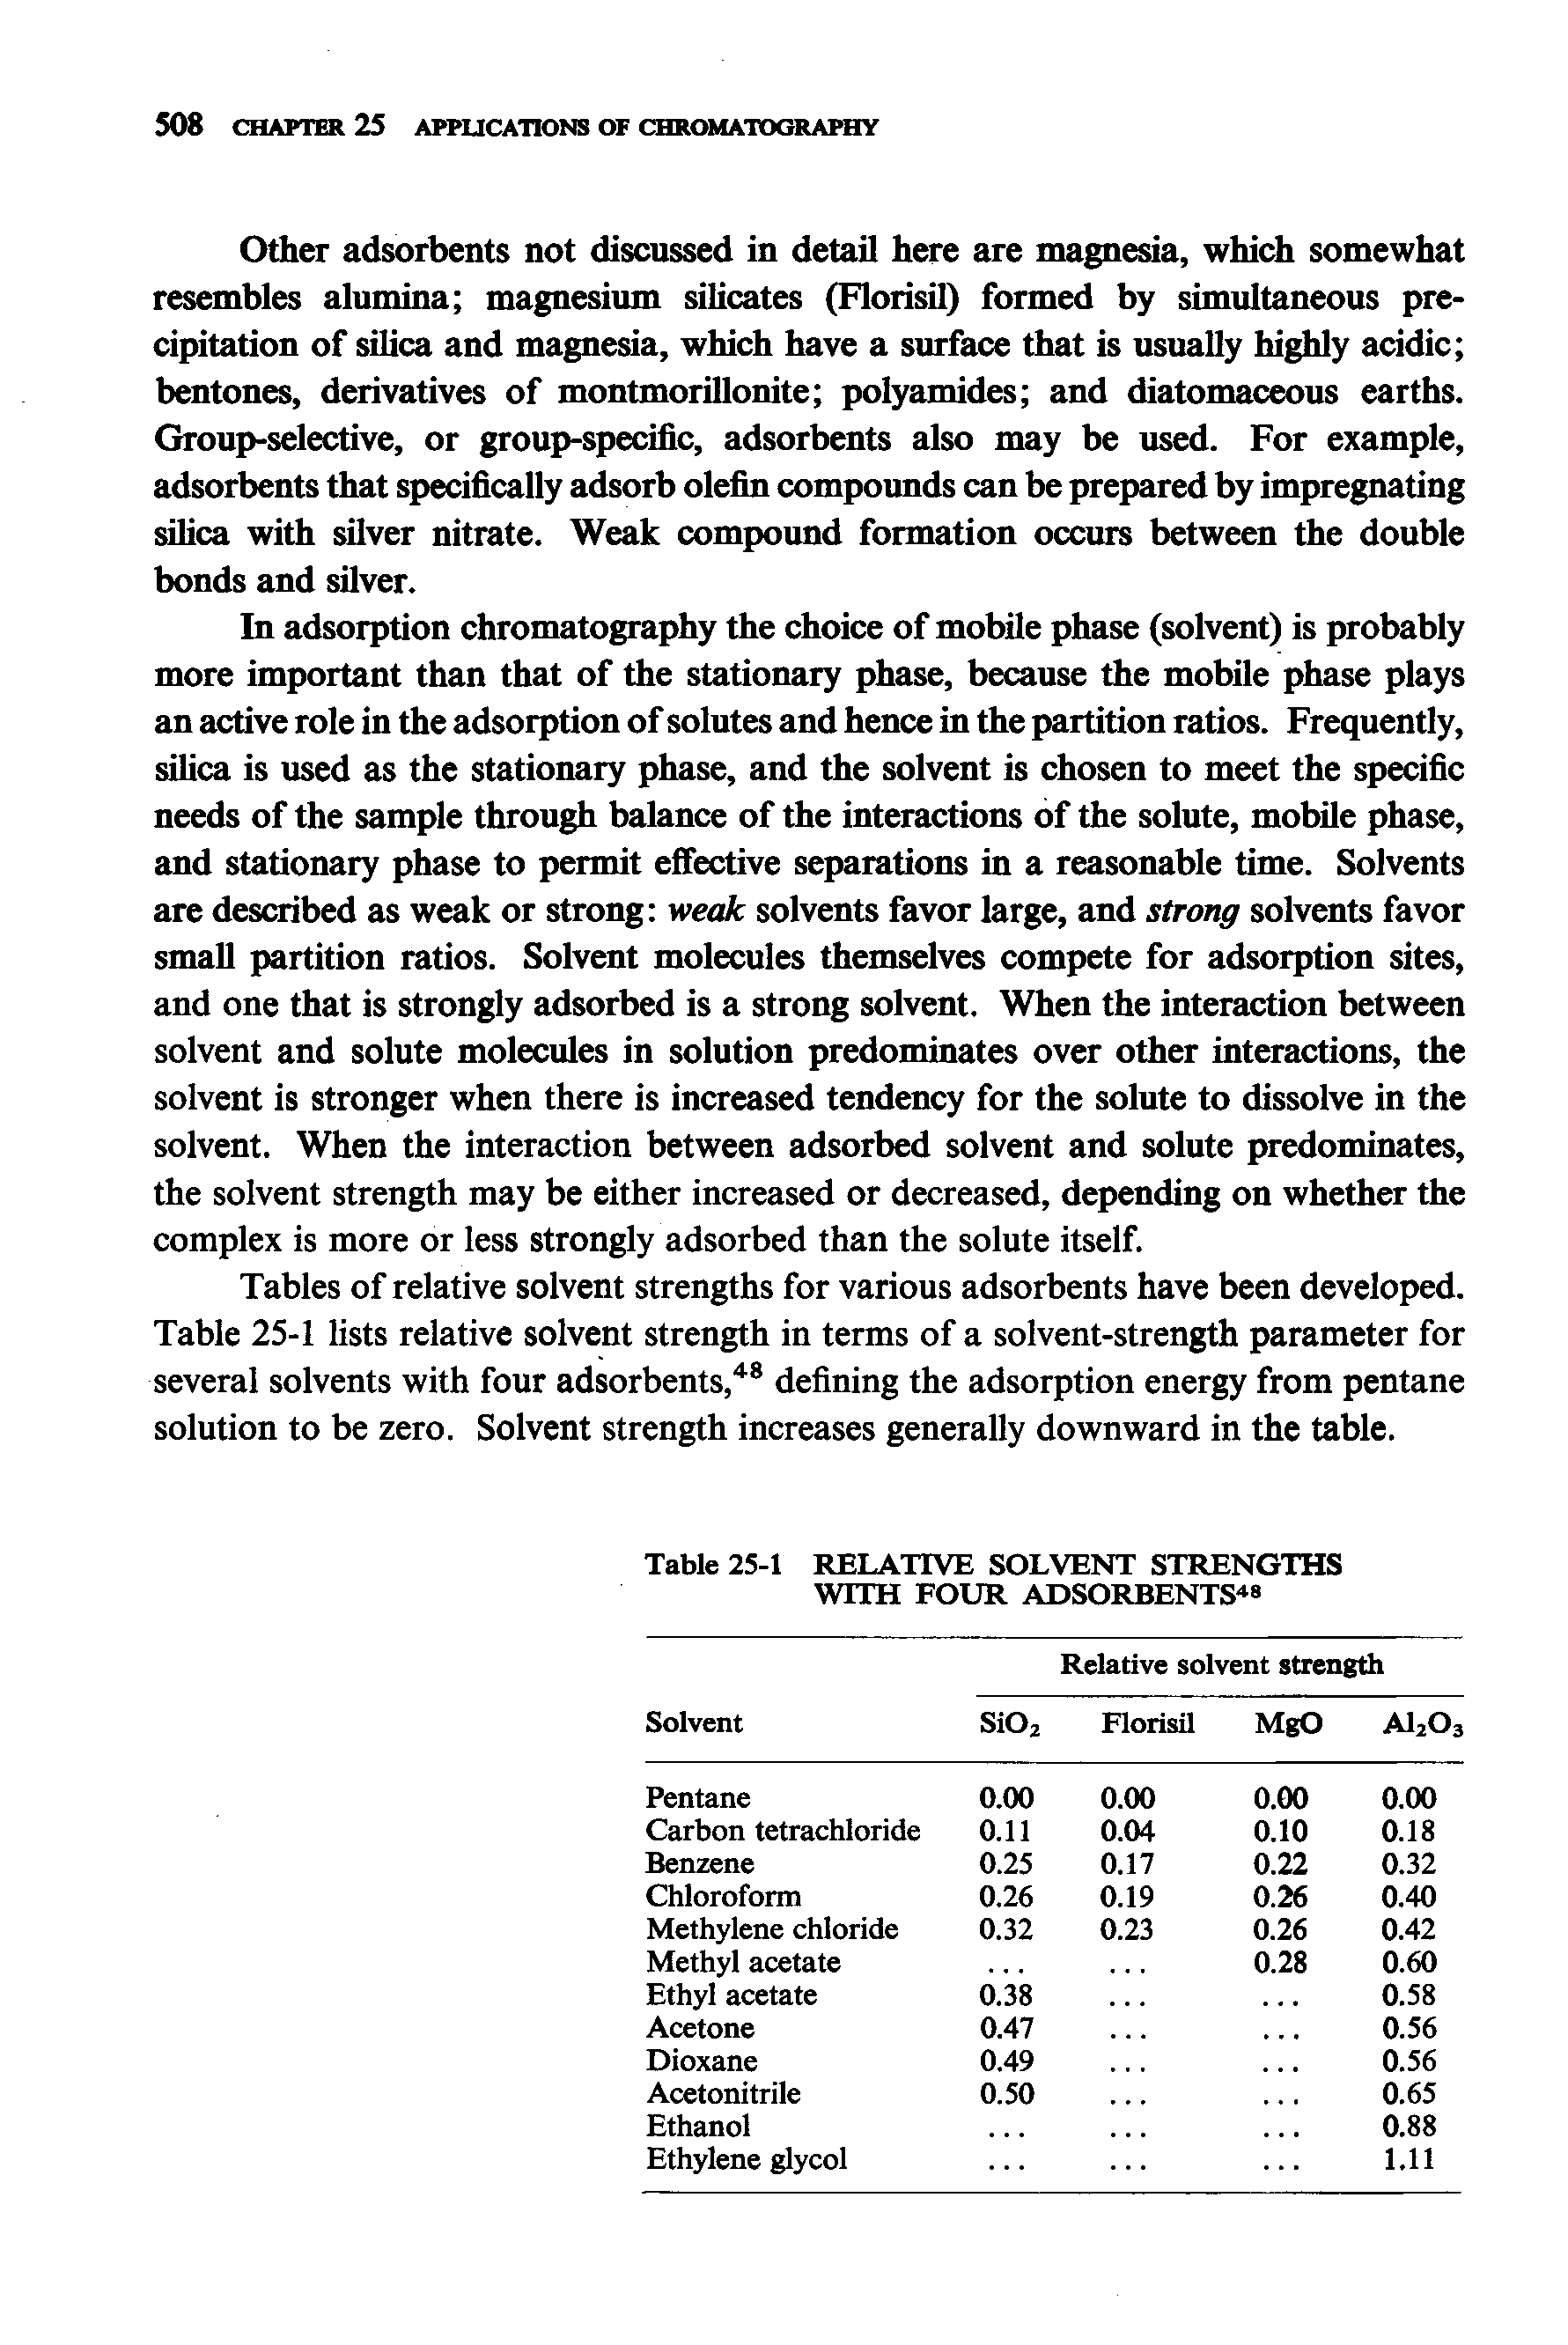 Tables of relative solvent strengths for various adsorbents have been developed. Table 25-1 lists relative solvent strength in terms of a solvent-strength parameter for several solvents with four adsorbents, defining the adsorption energy from pentane solution to be zero. Solvent strength increases generally downward in the table.